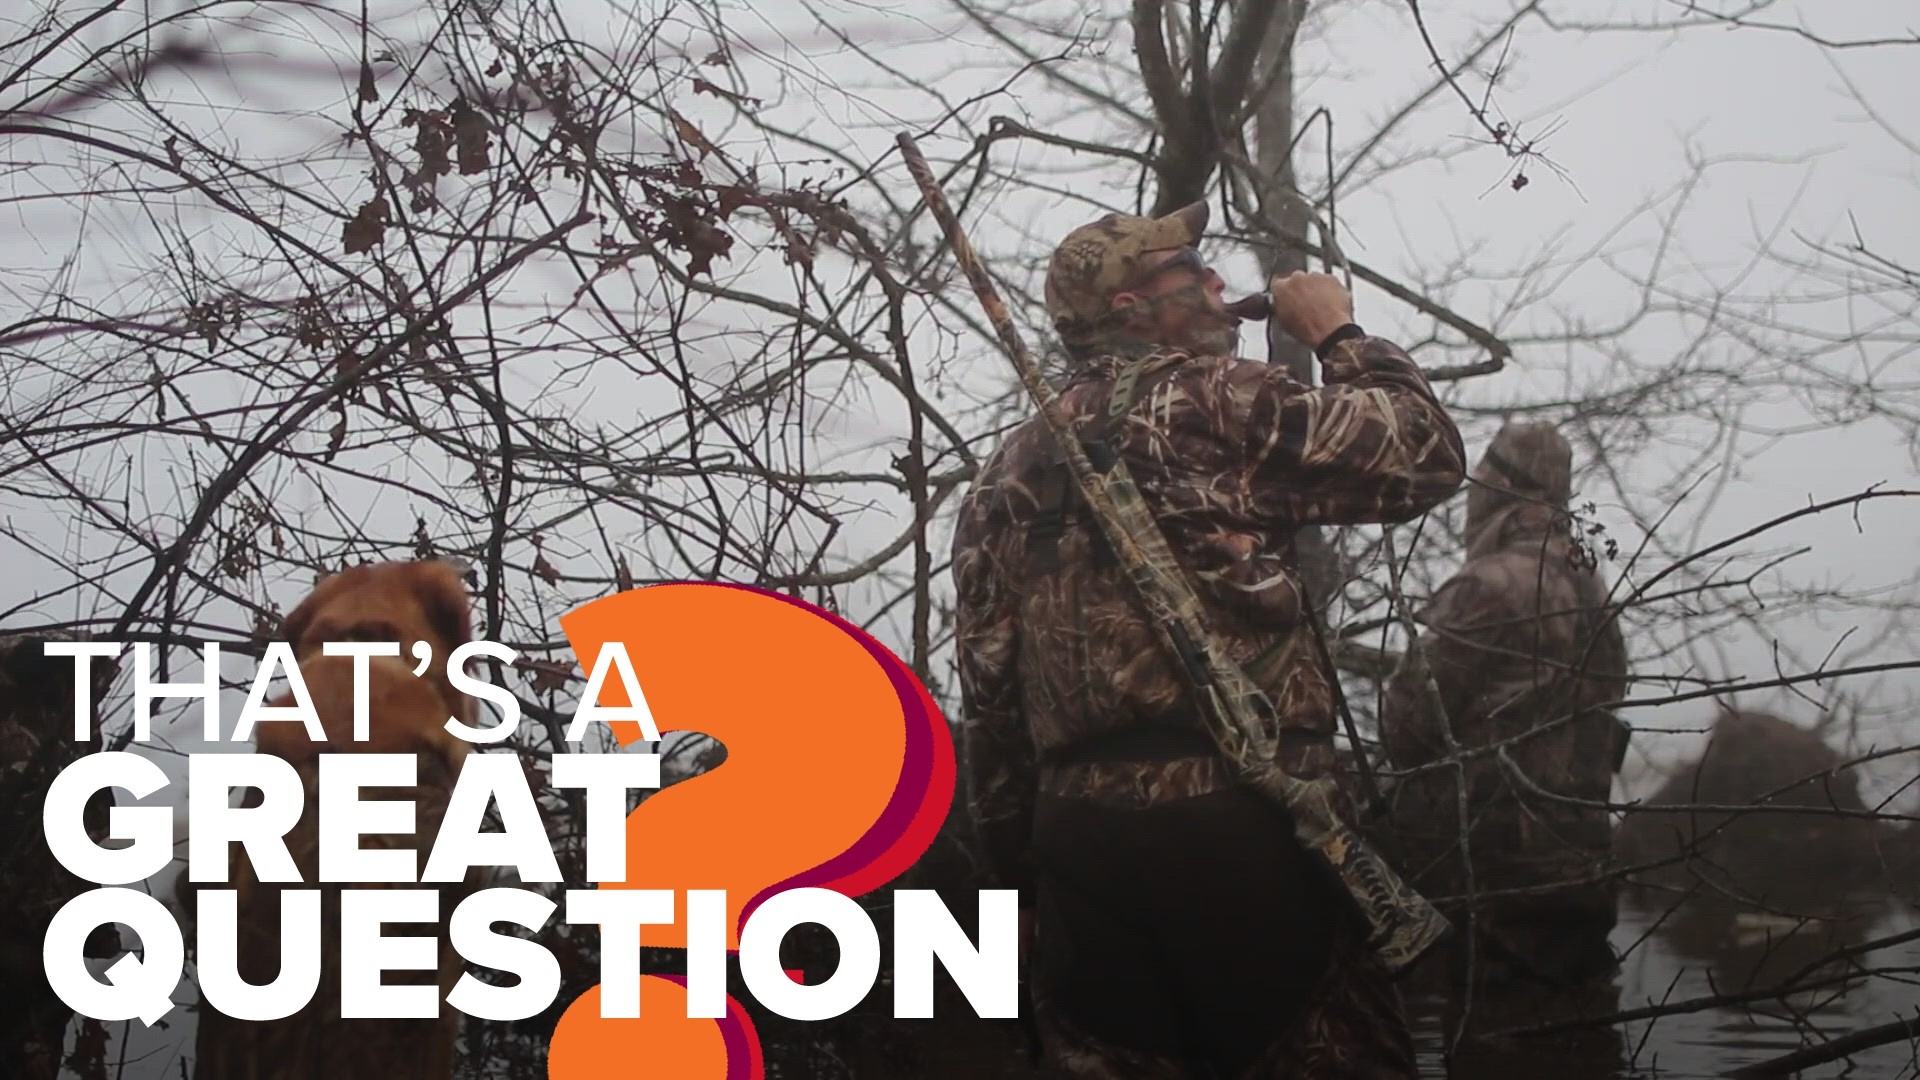 Arkansans know our state offers some of the best duck hunting in the world, but there is a big change hunters need to know ahead of the next waterfowl season.